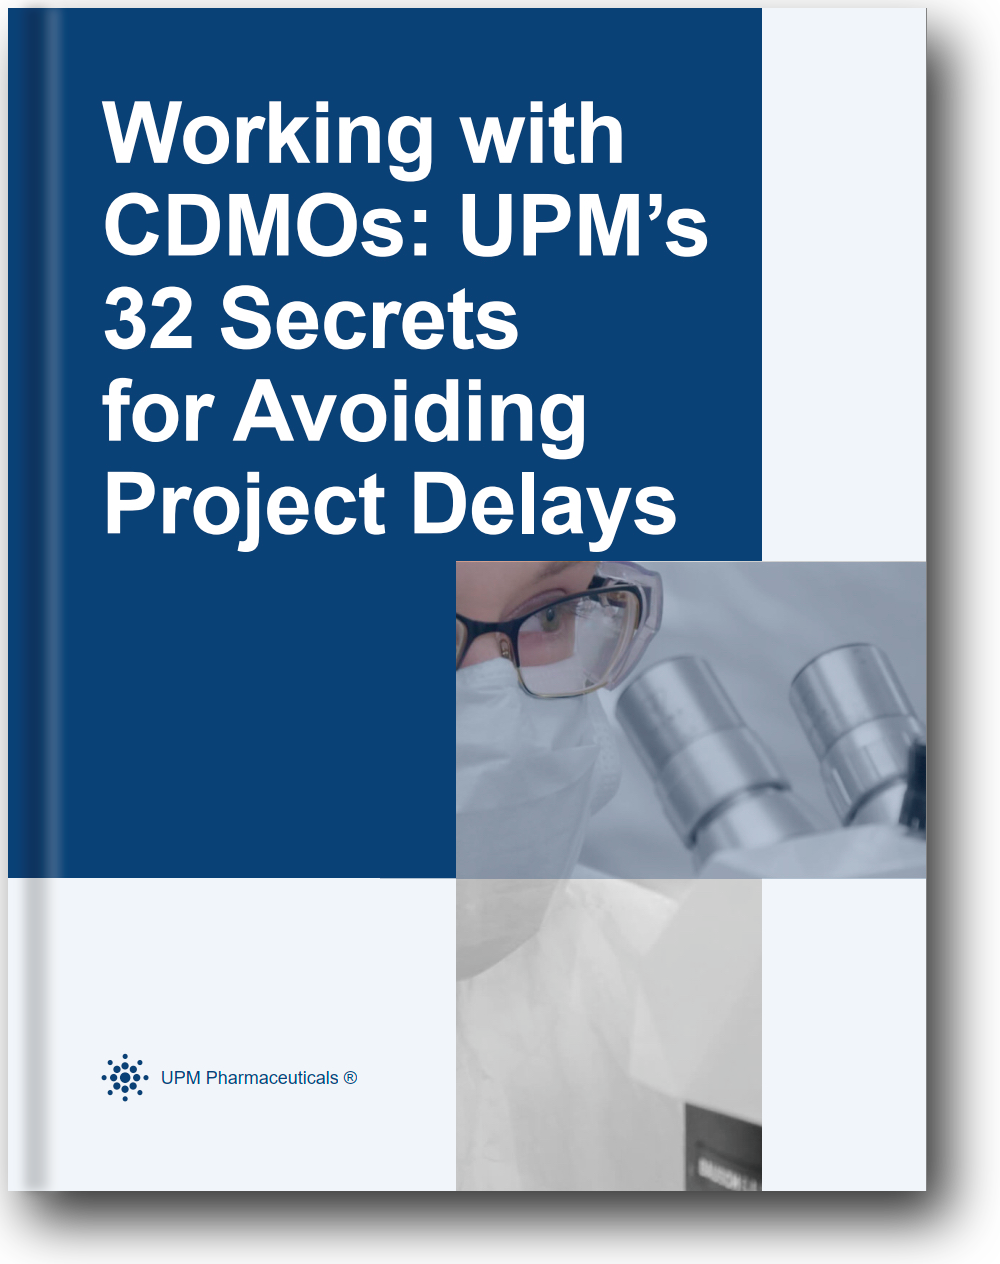 32 secretes to avoid project delays when working with CDMOs